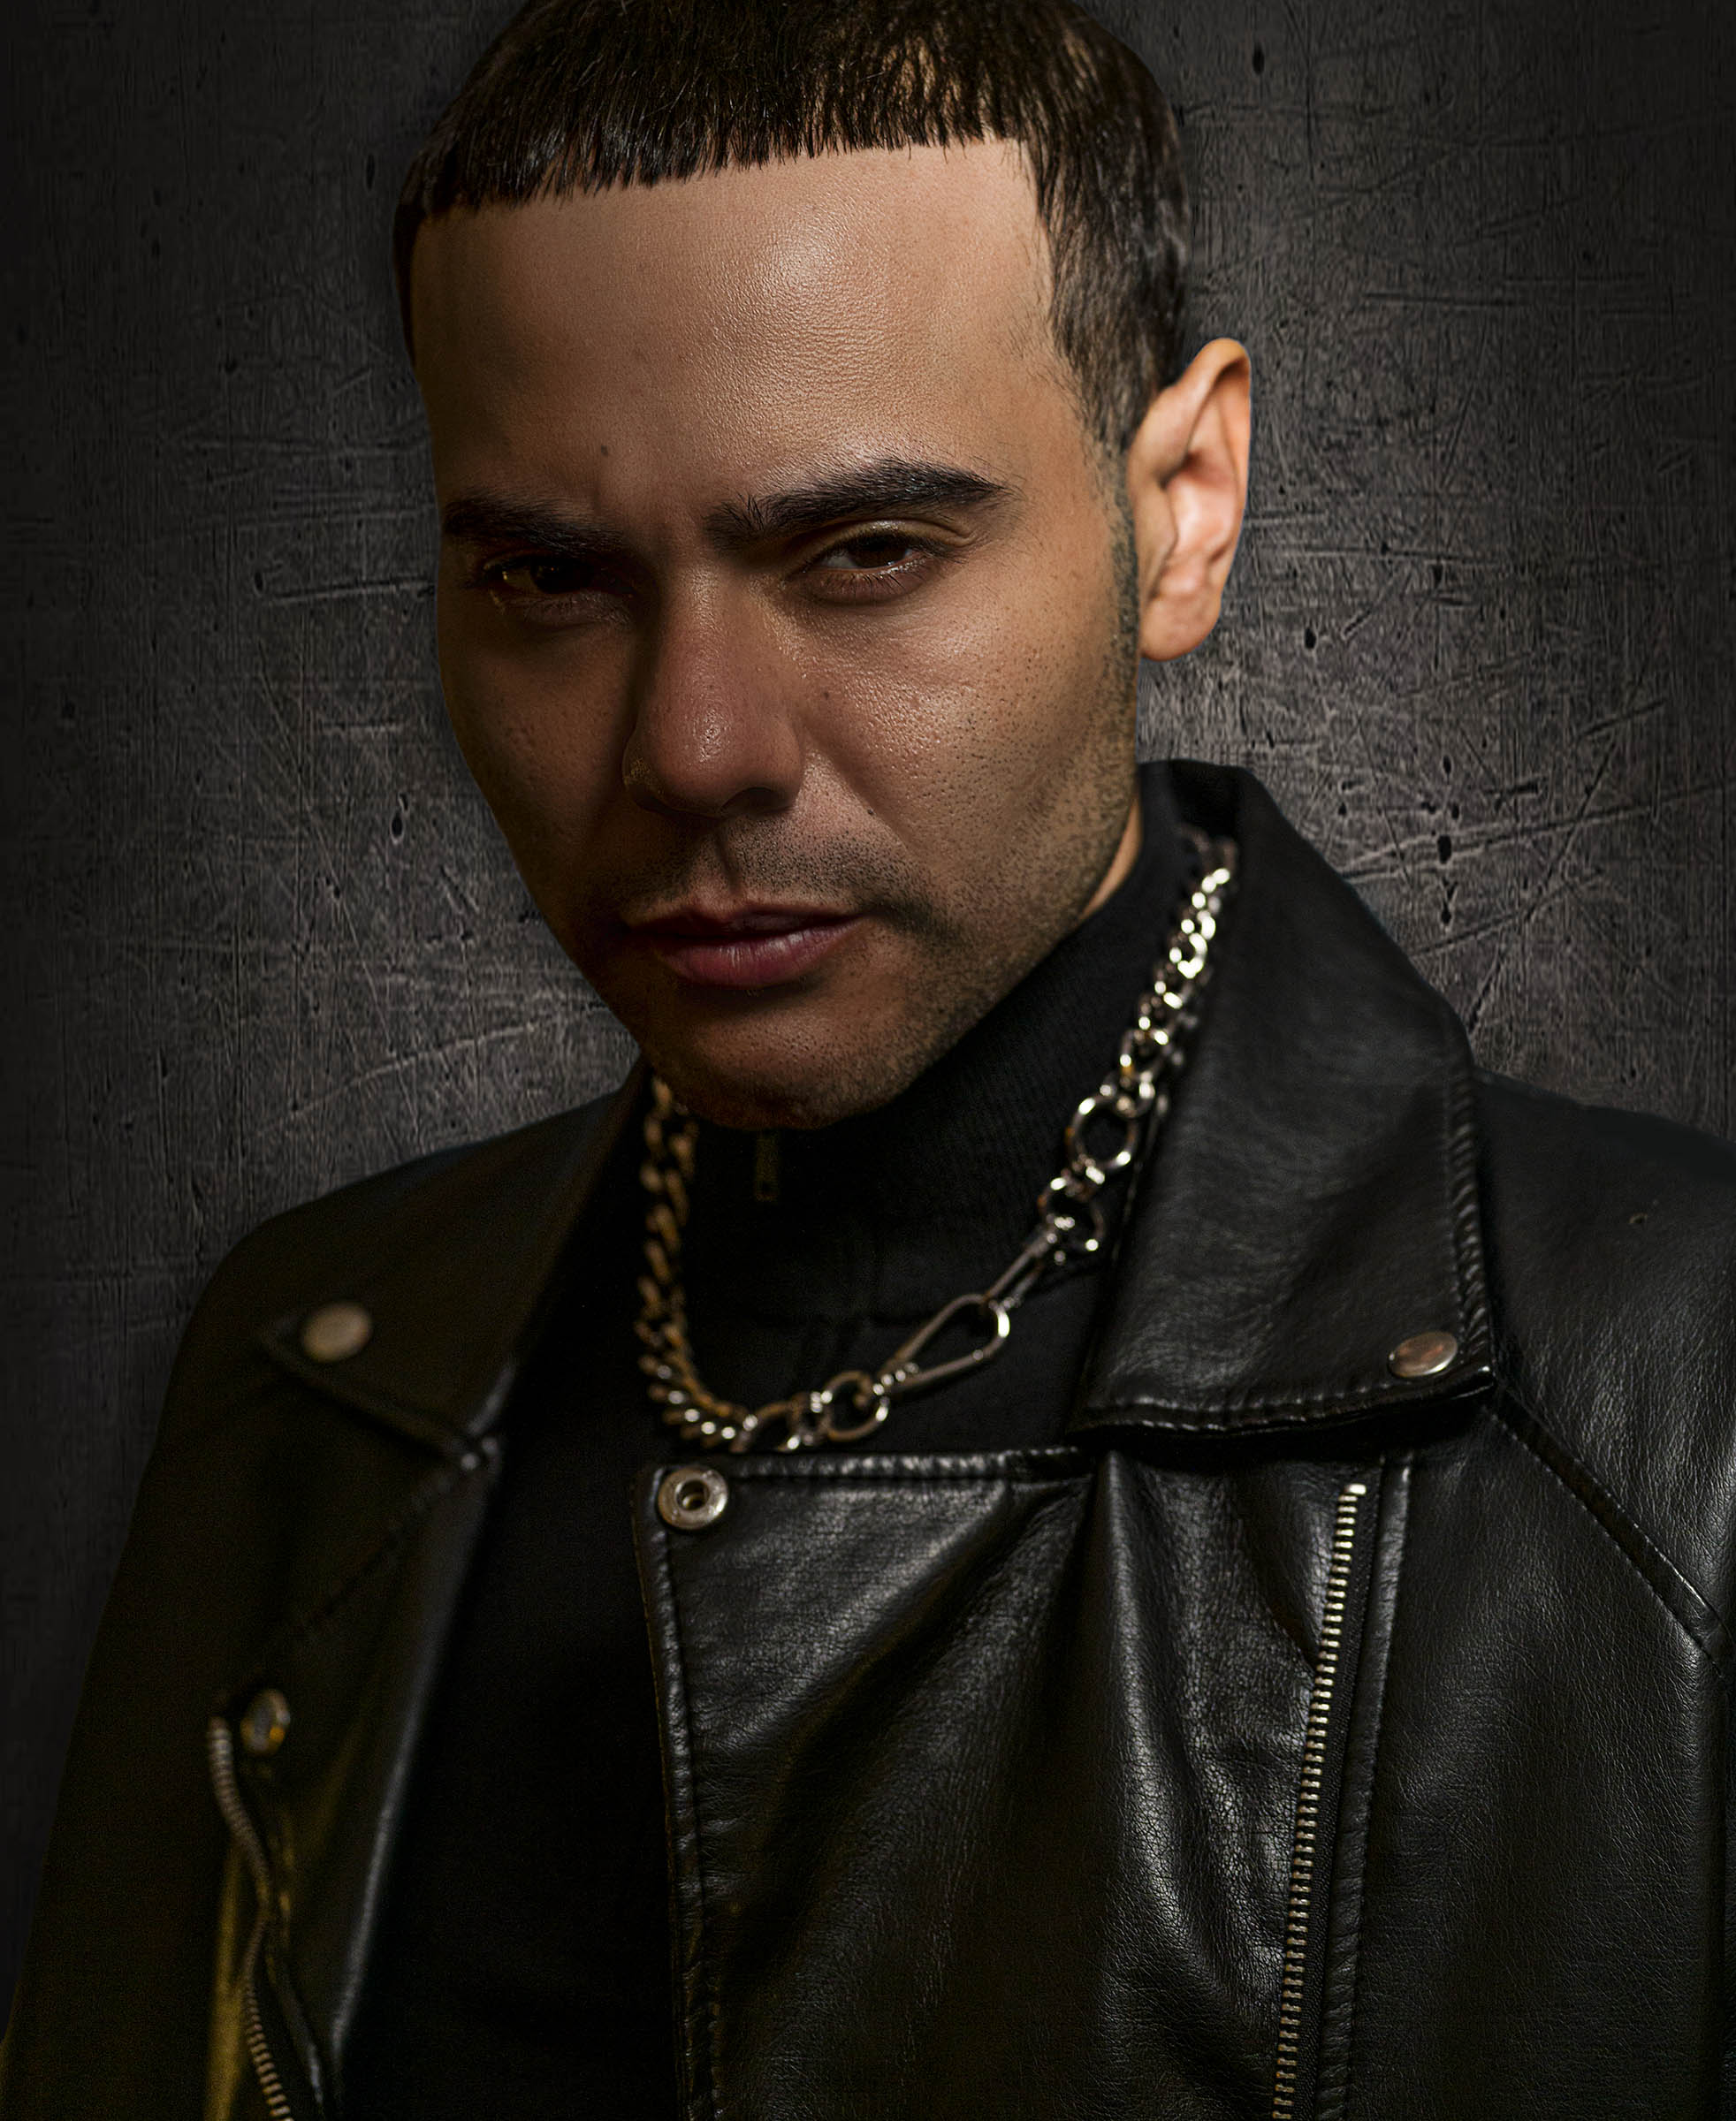 Robbie Santana, NYC Rapper, Film Actor, Social Influencer, Lifestyle Portrait by Wick Beavers the Best Portrait Photographer in NY editorial Magazine Portraits